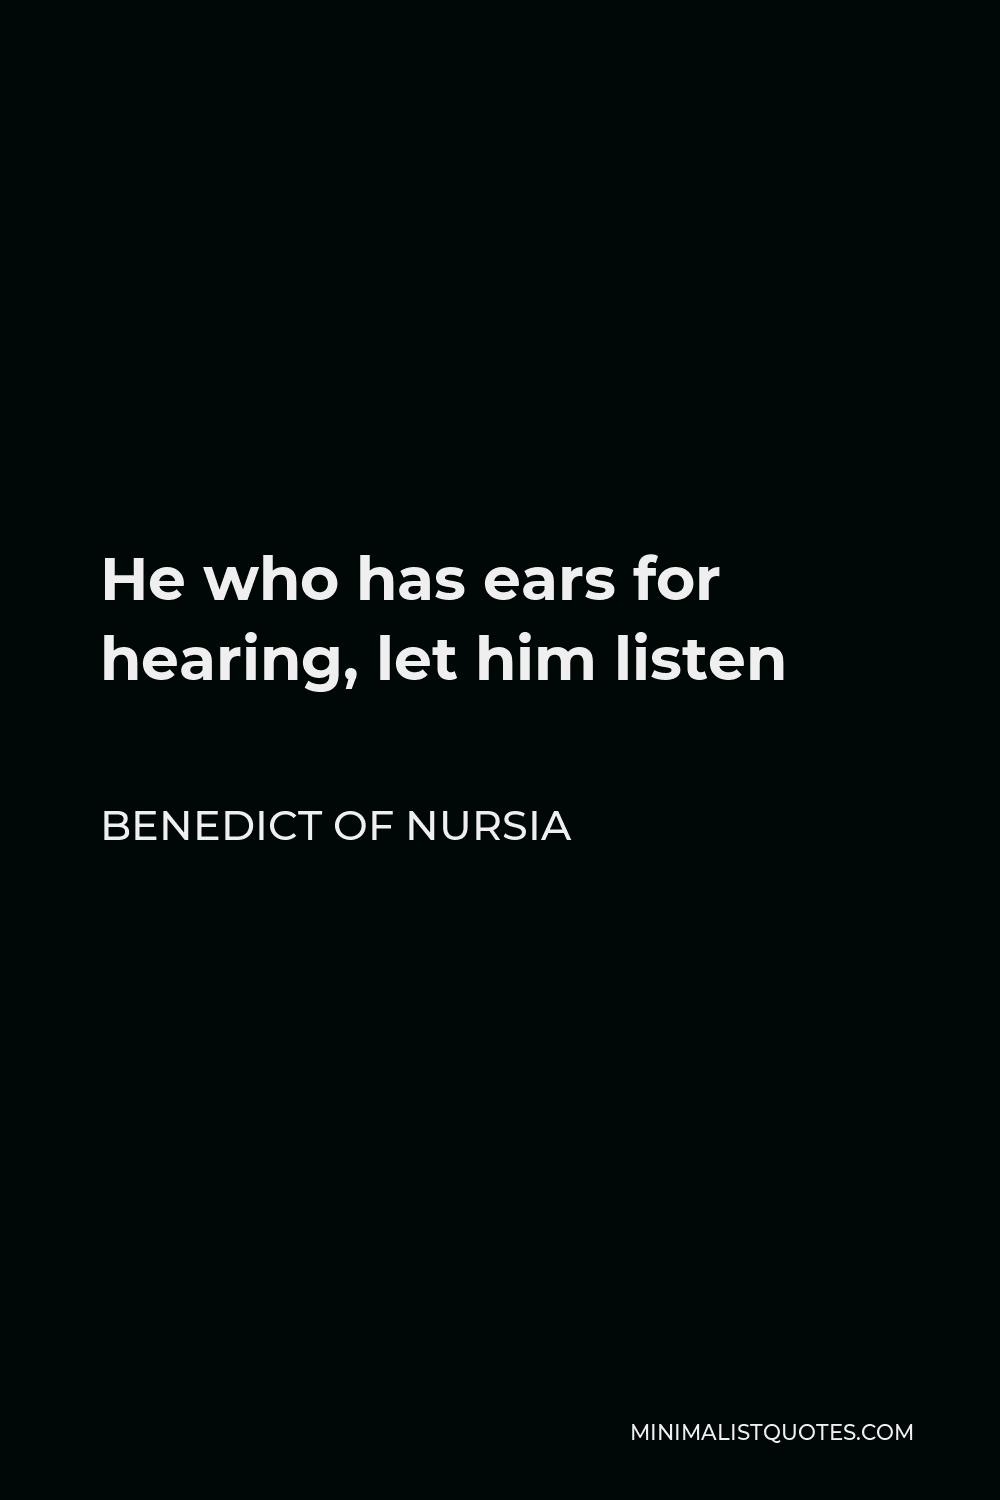 Benedict of Nursia Quote - He who has ears for hearing, let him listen